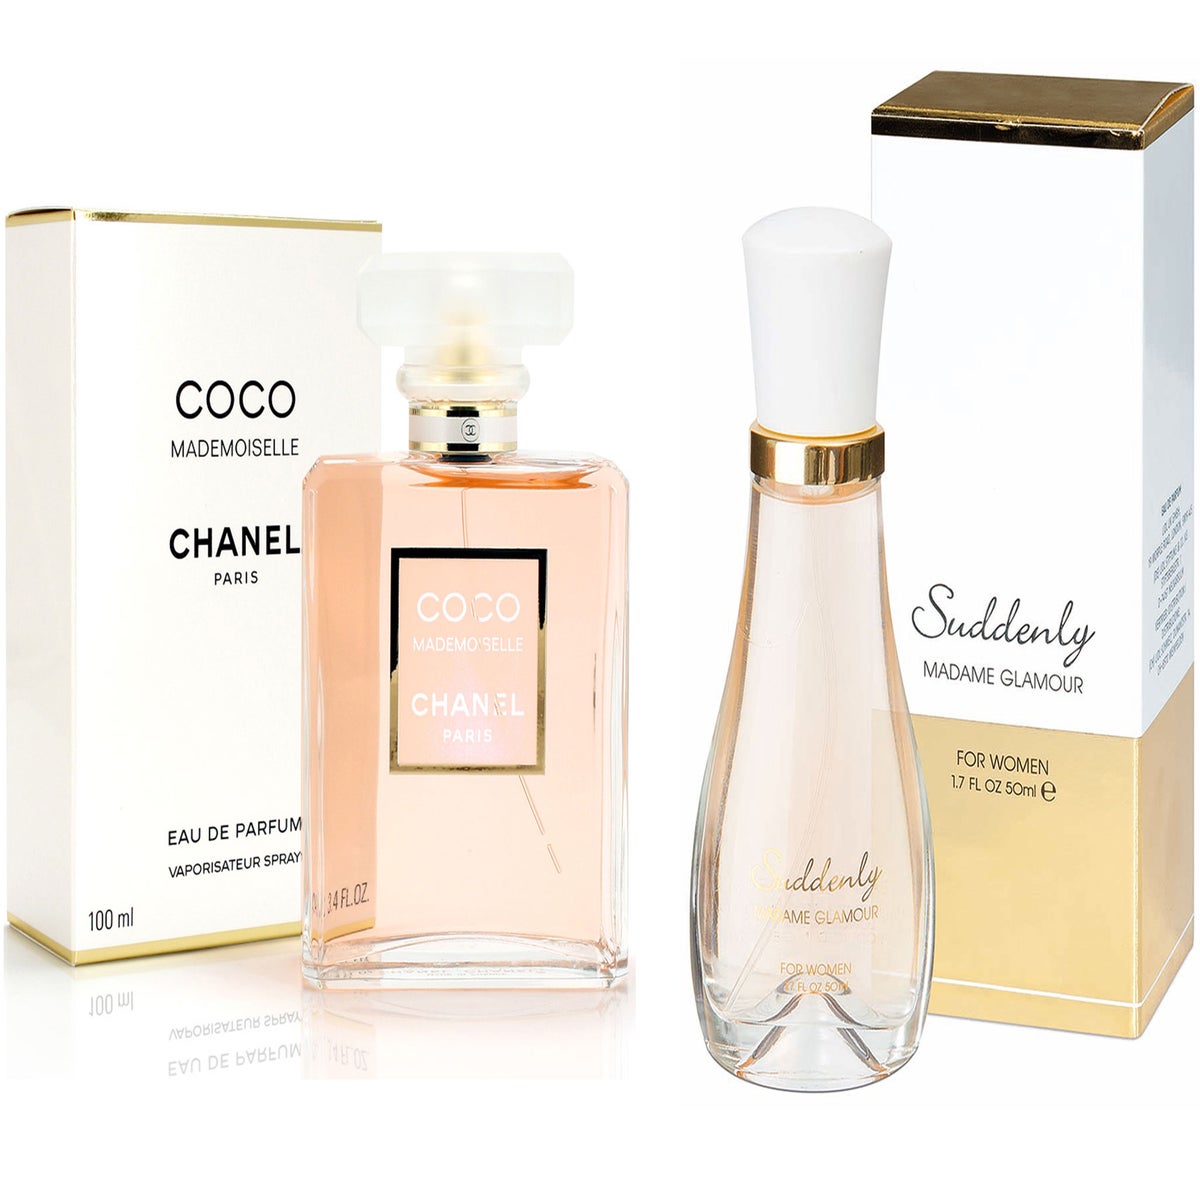 Lidl's are offering a perfume similar to Chanel's Coco Mademoiselle